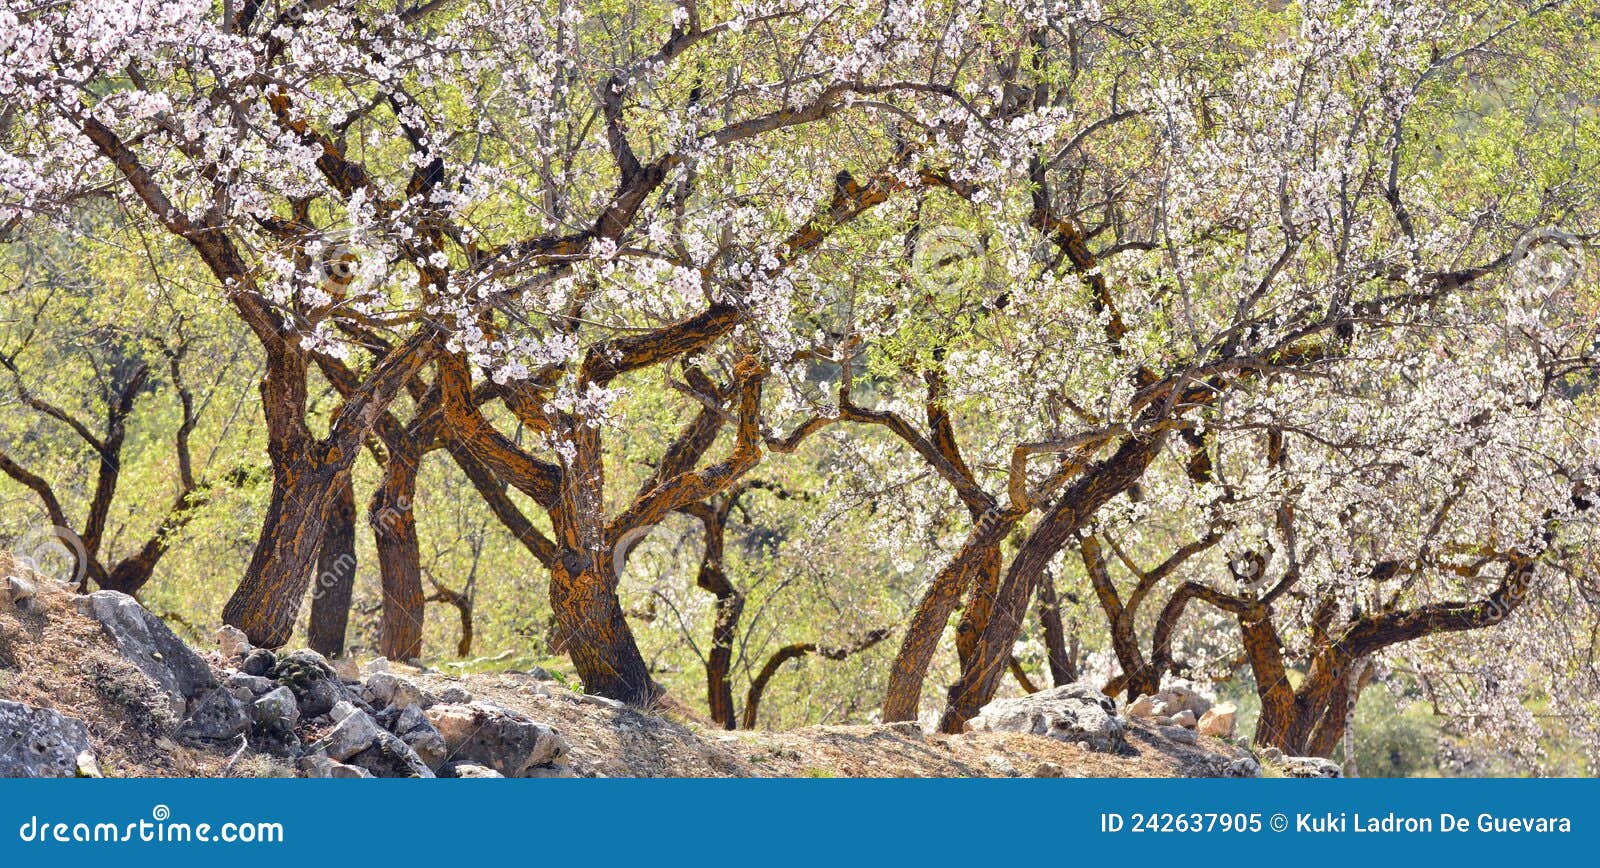 plantation of old almond trees in bloom